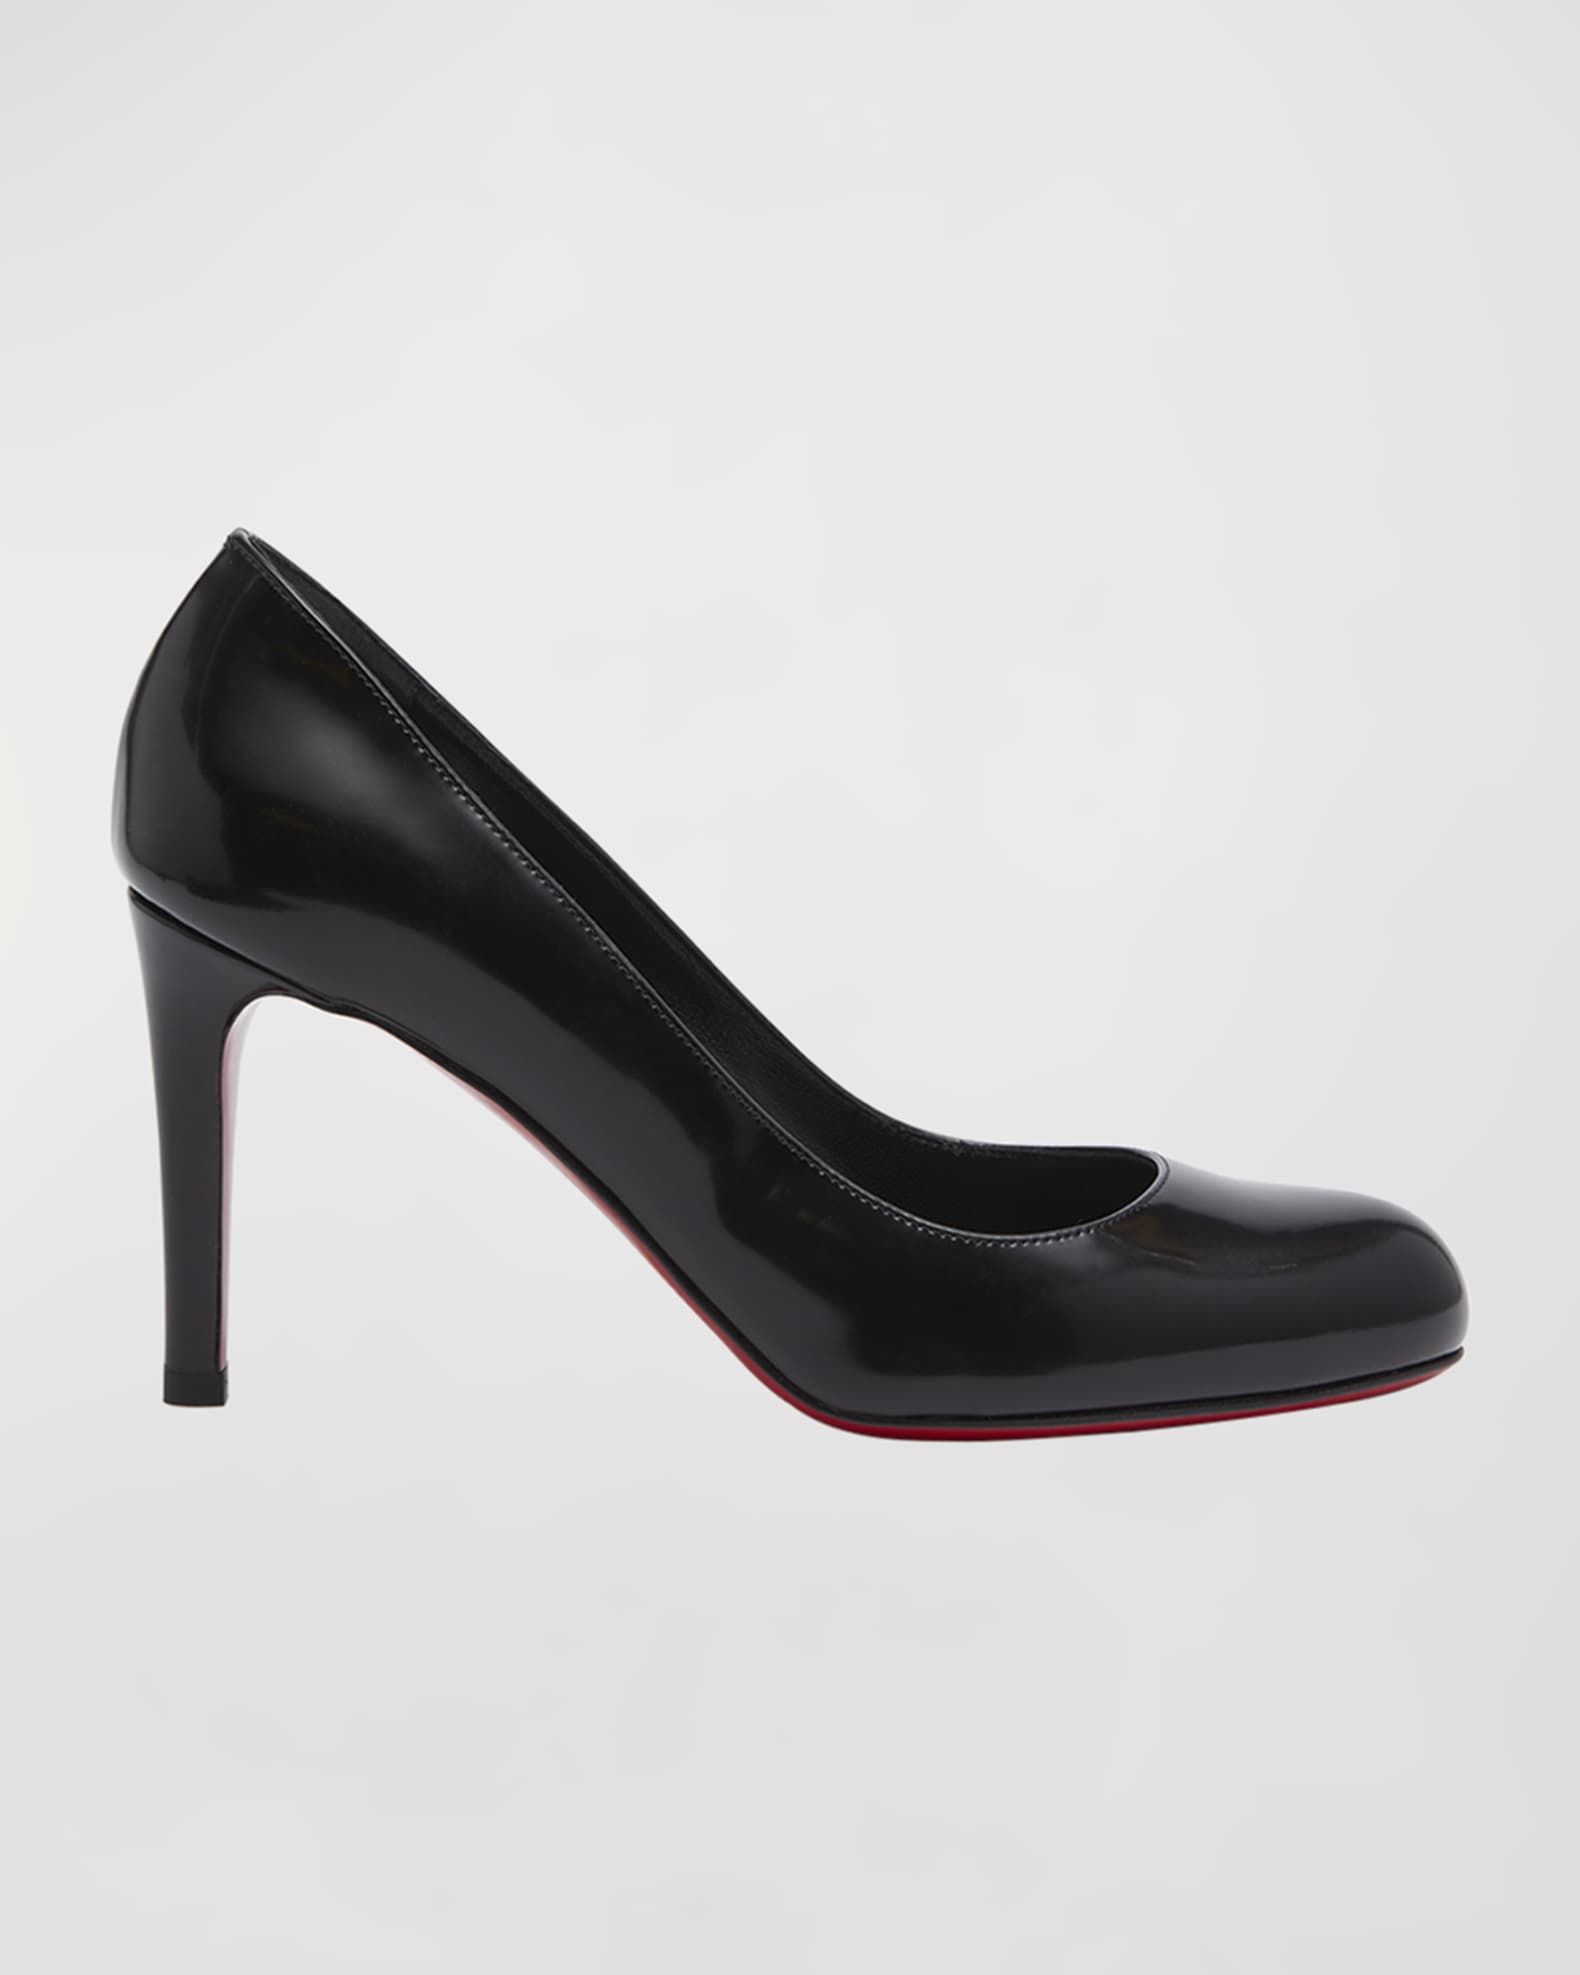 Christian Louboutin Pumppie Abrasivato Red Sole Calfskin Leather Pumps ...